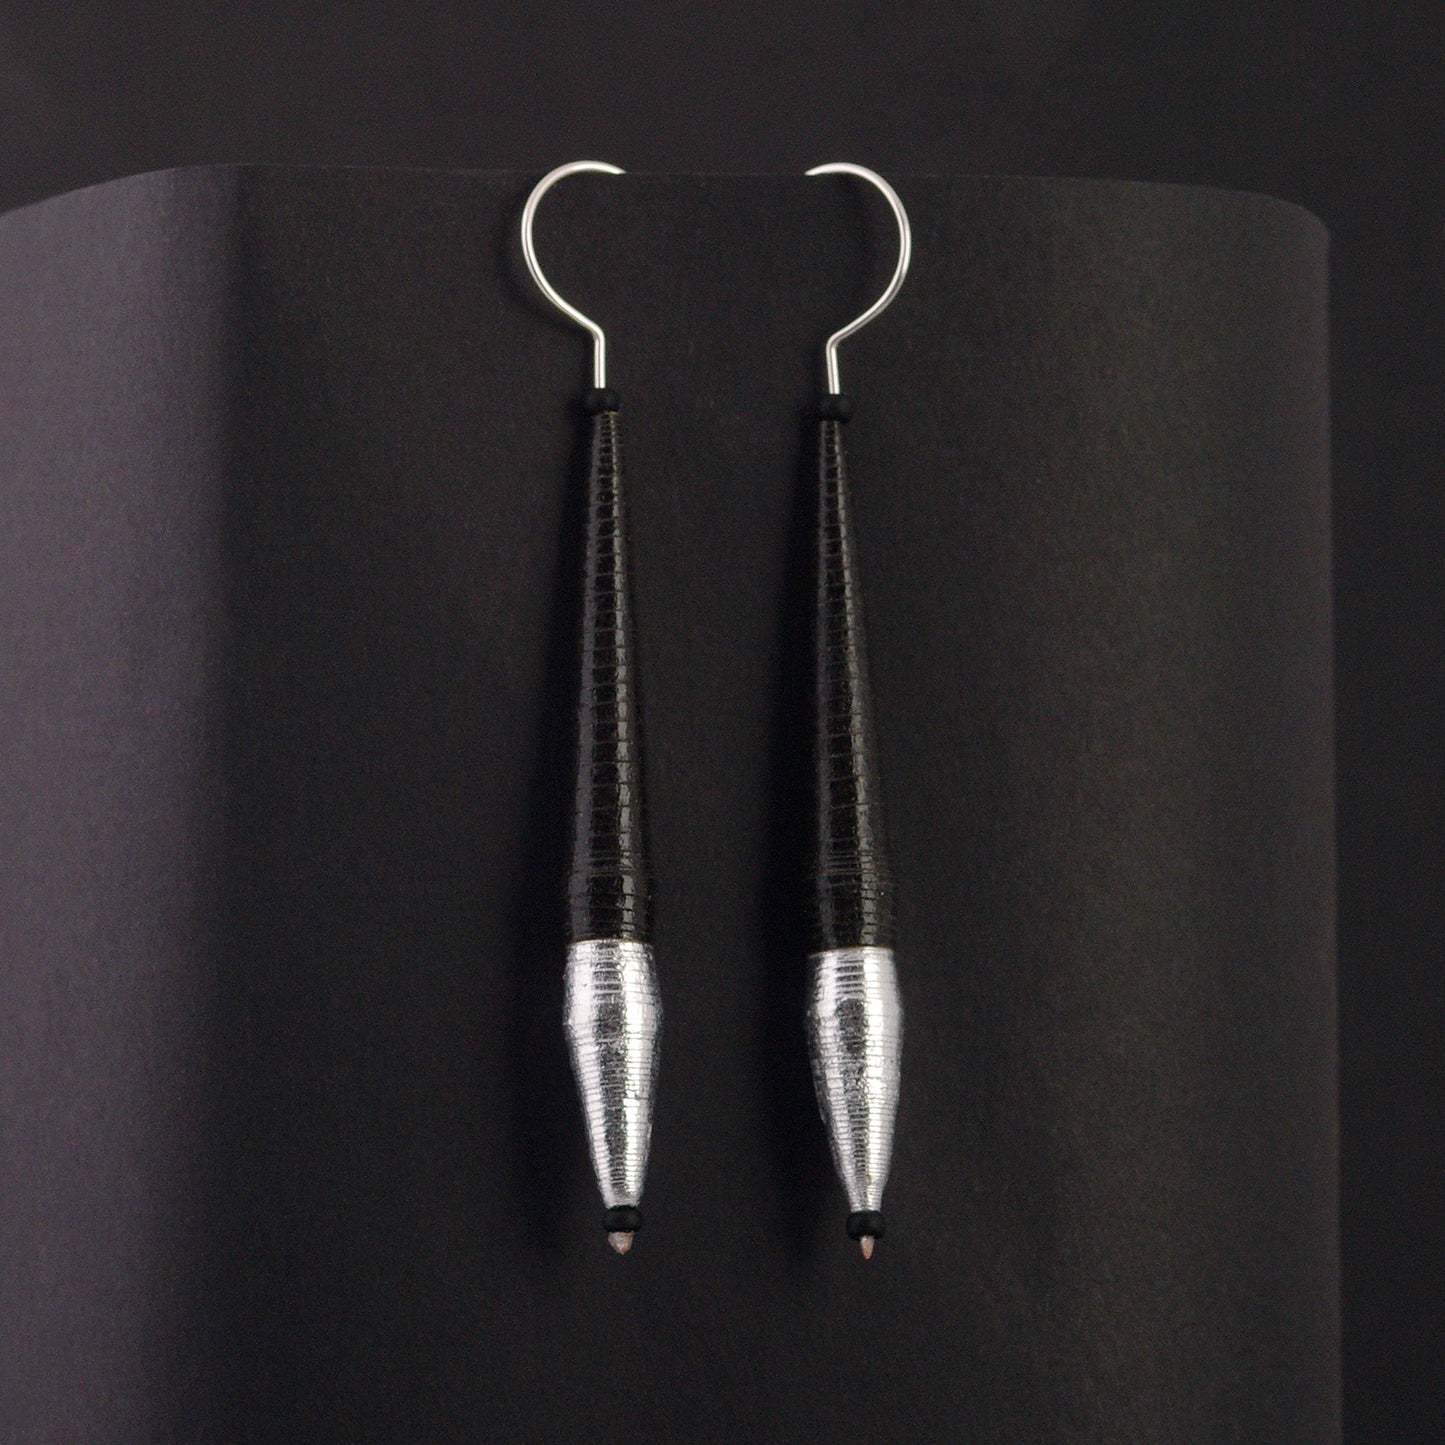 Pen-Shaped Black Earrings with Silver Accents